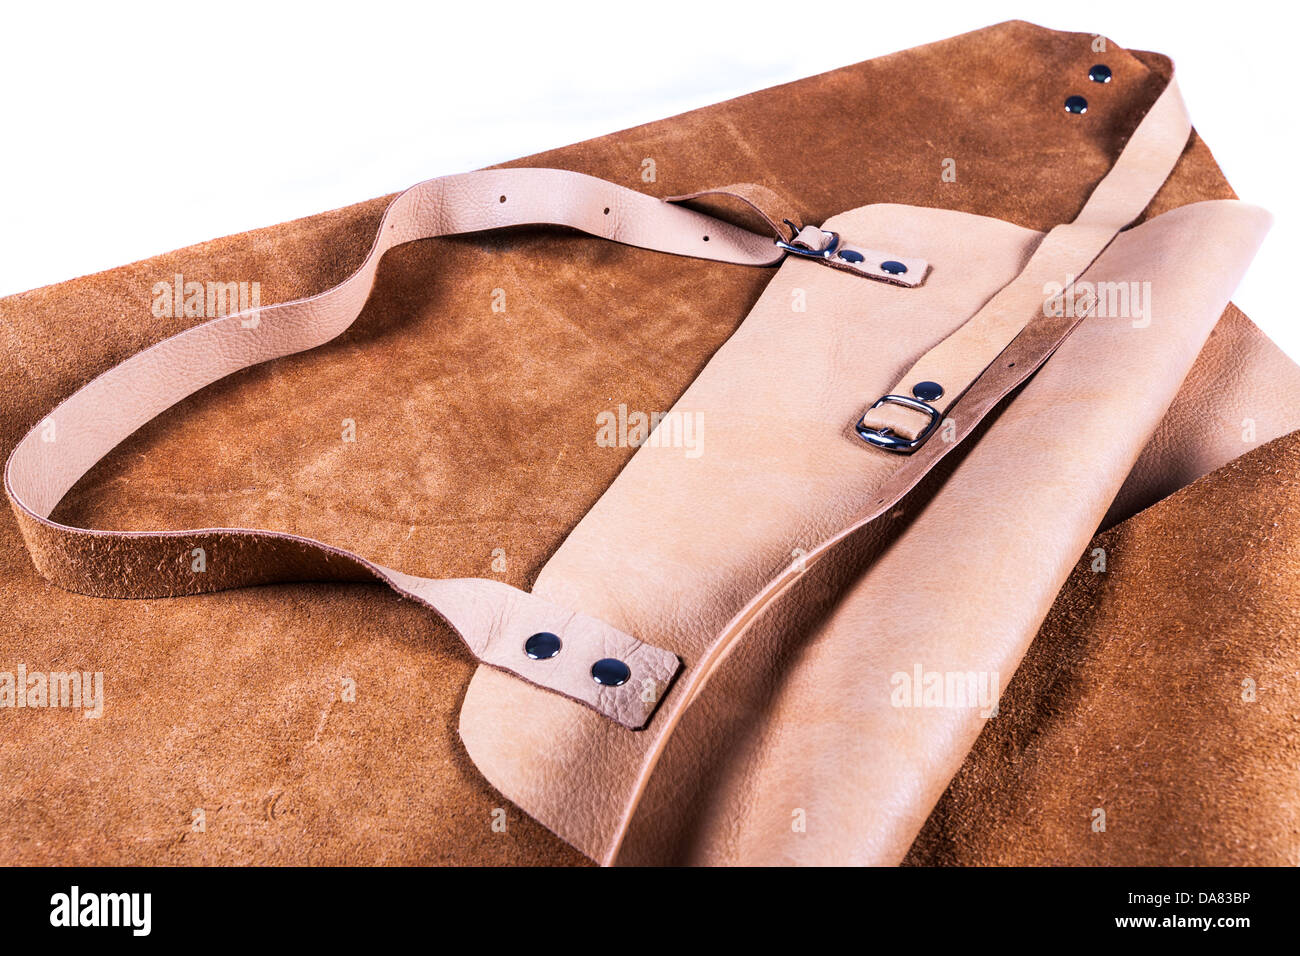 Leather apron welder protection for body. Stock Photo